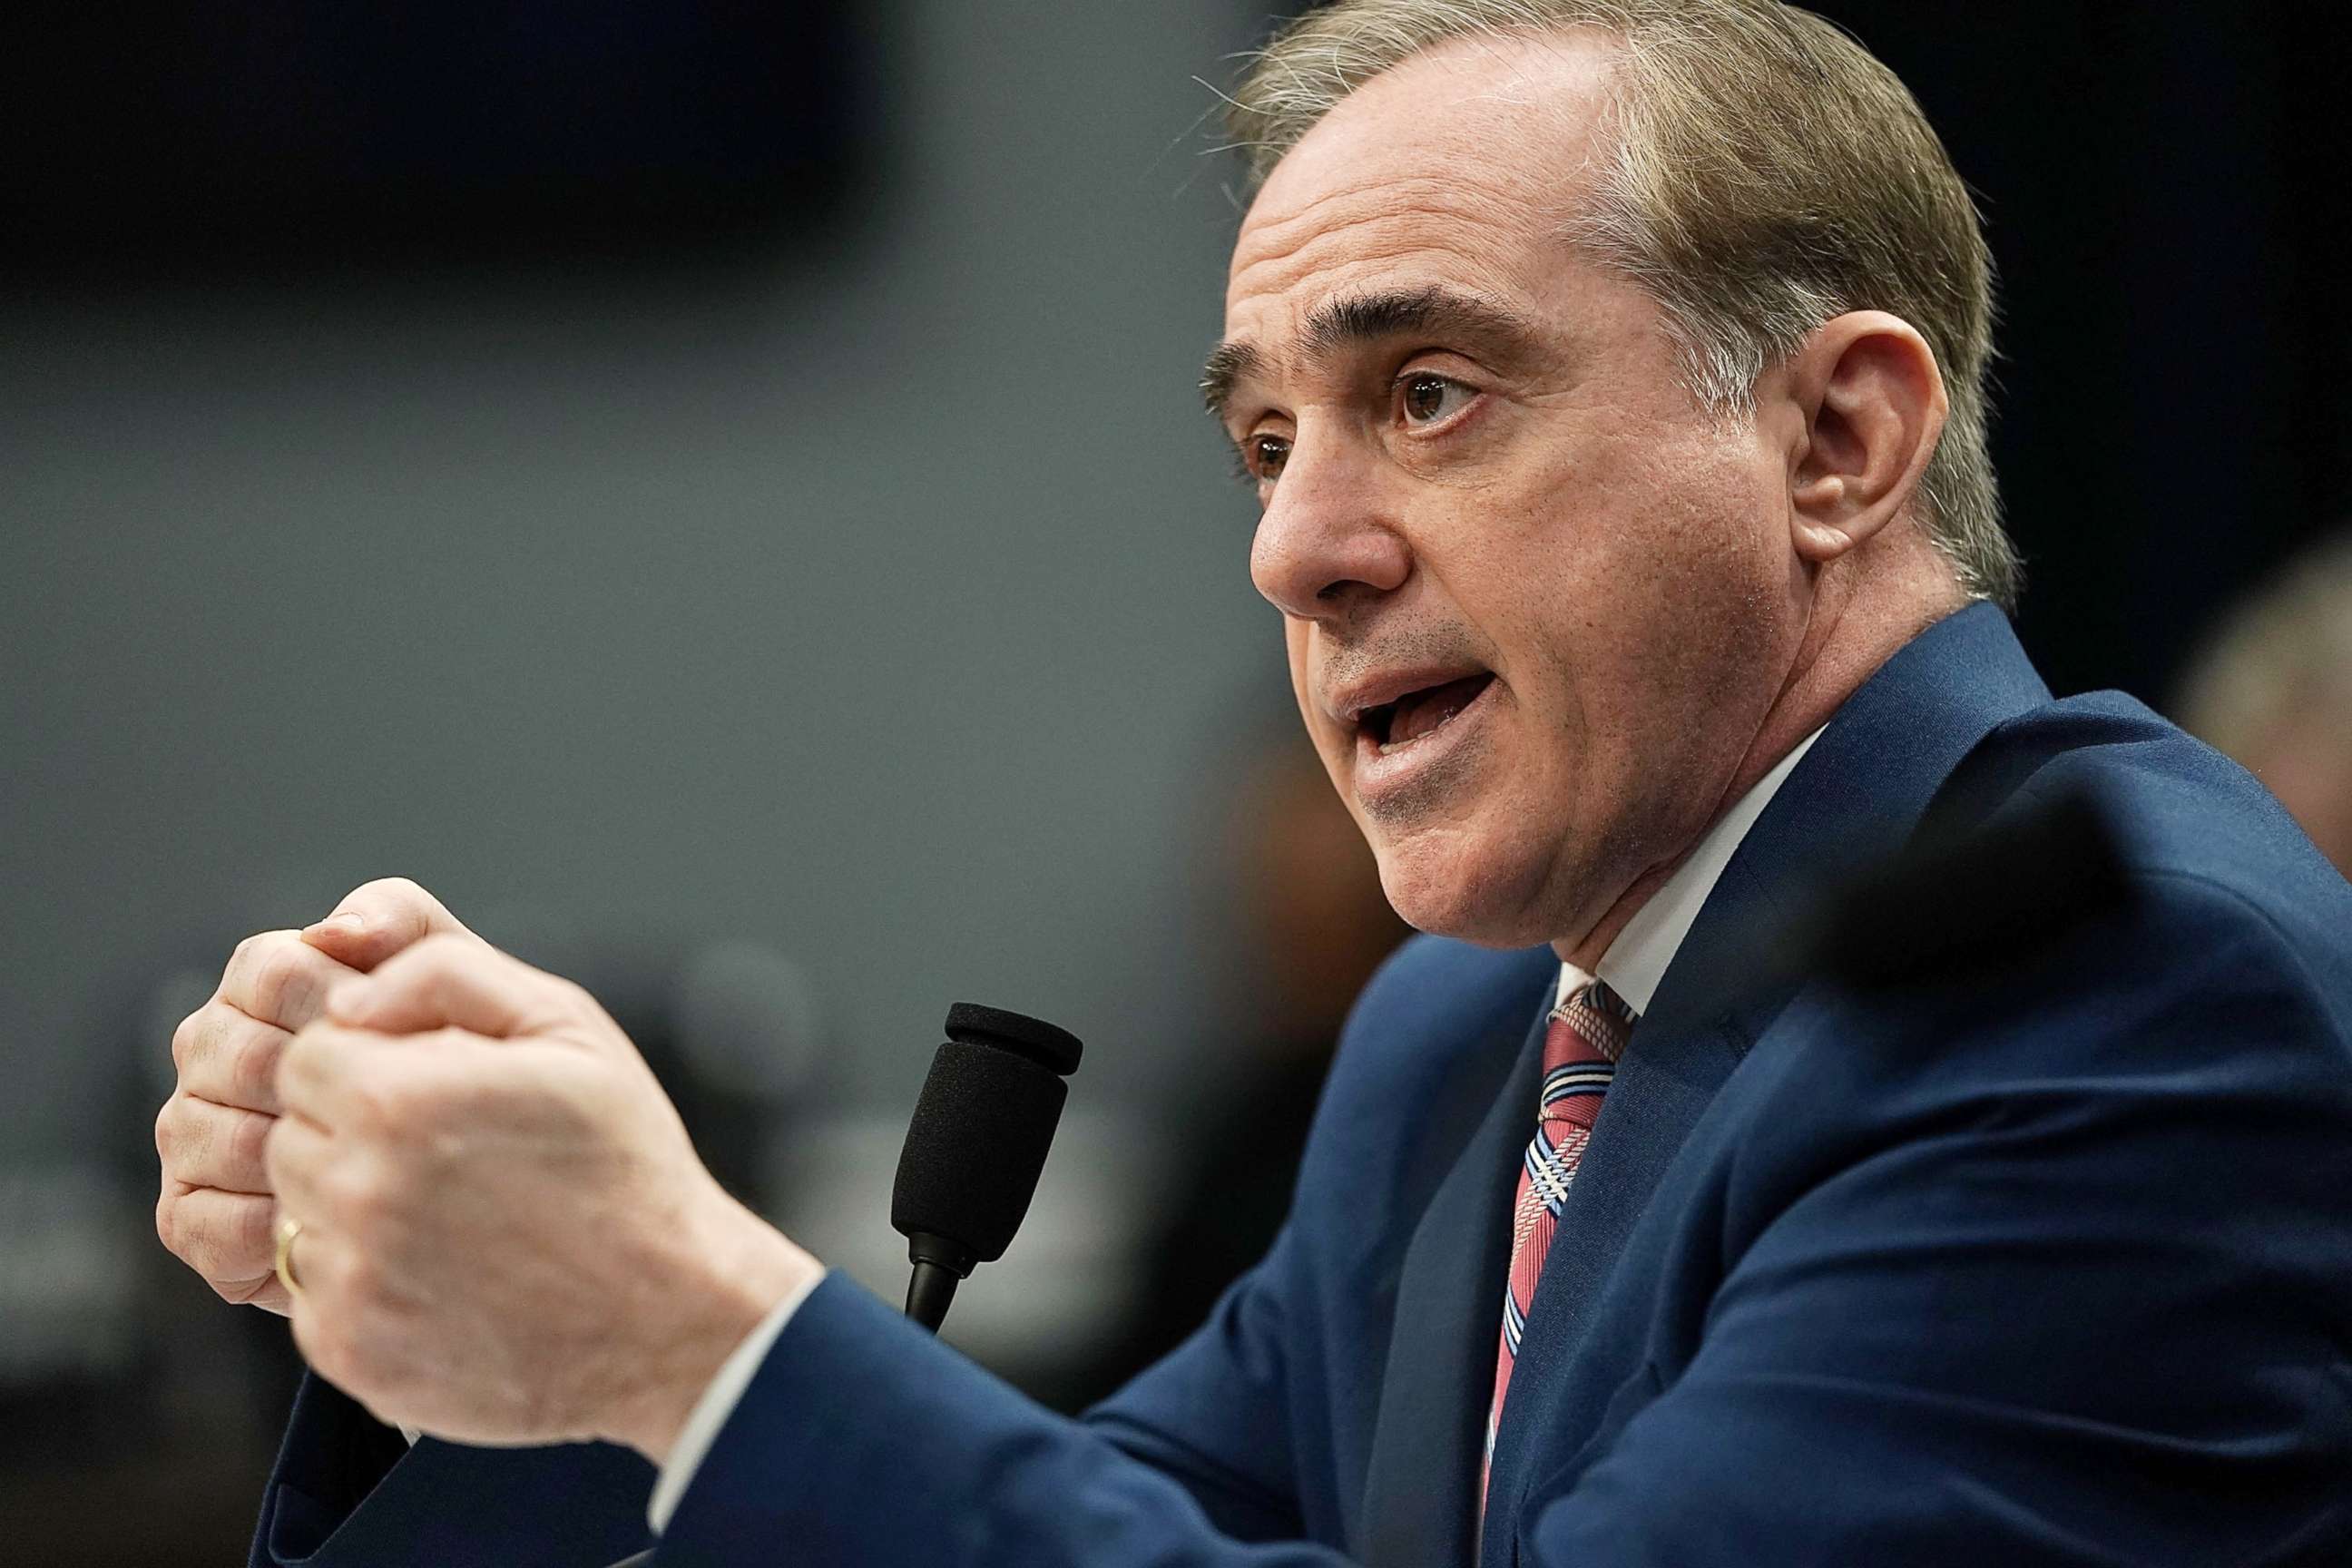 PHOTO: Secretary of Veterans Affairs David Shulkin testifies during a hearing before the Military Construction, Veterans Affairs, and Related Agencies Subcommittee of House Appropriations Committee, March 15, 2018, on Capitol Hill in Washington, D.C.